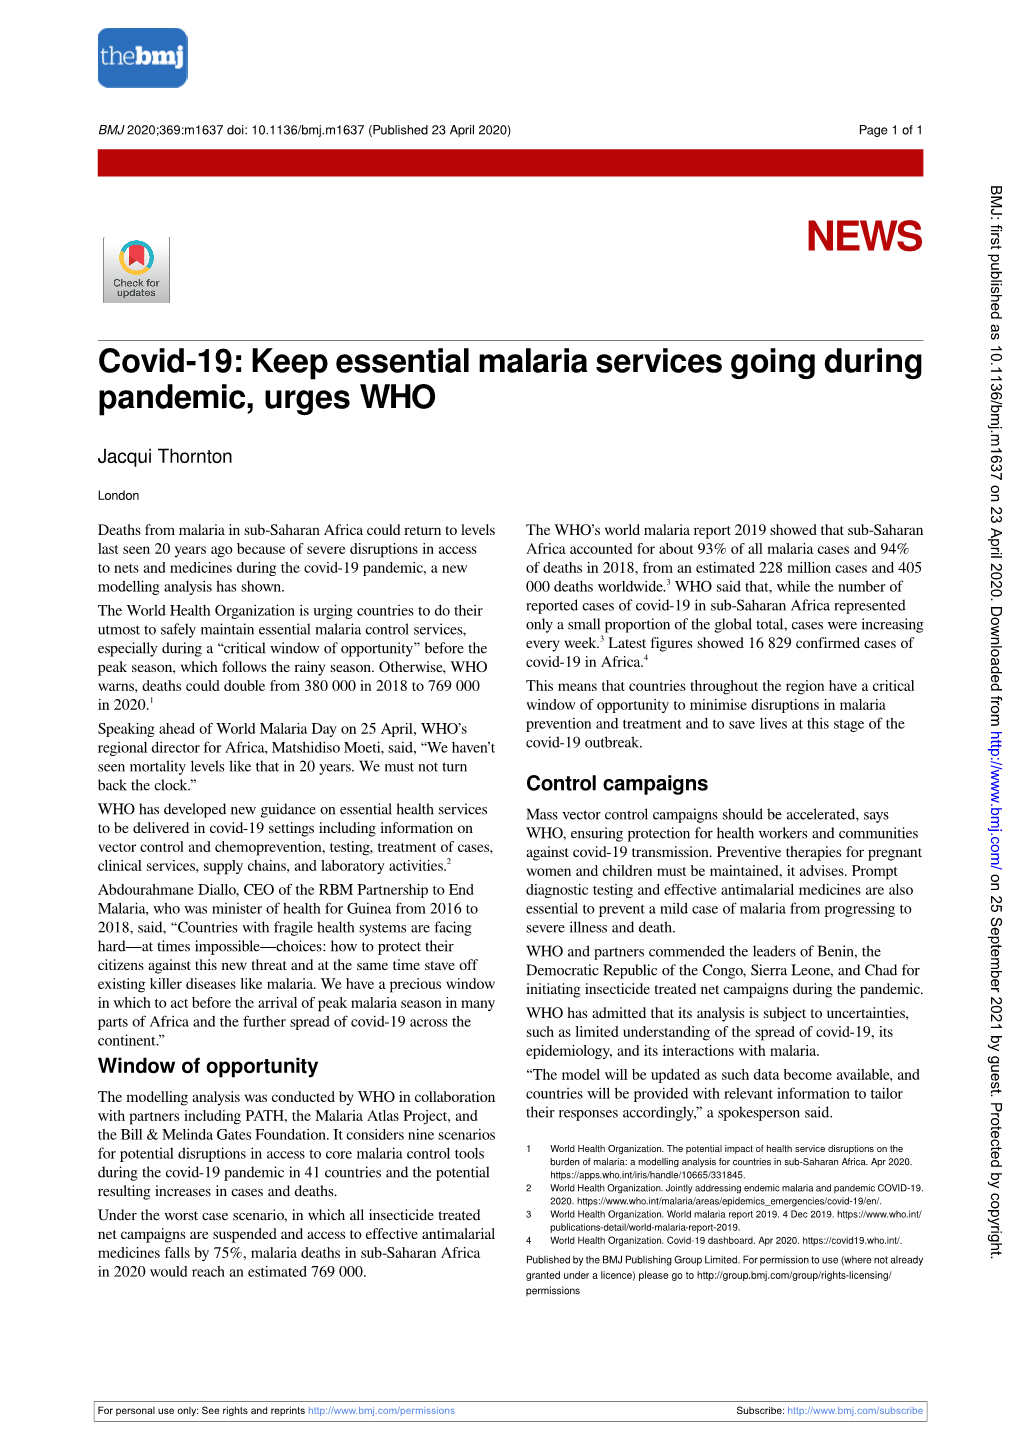 Covid-19: Keep Essential Malaria Services Going During Pandemic, Urges WHO